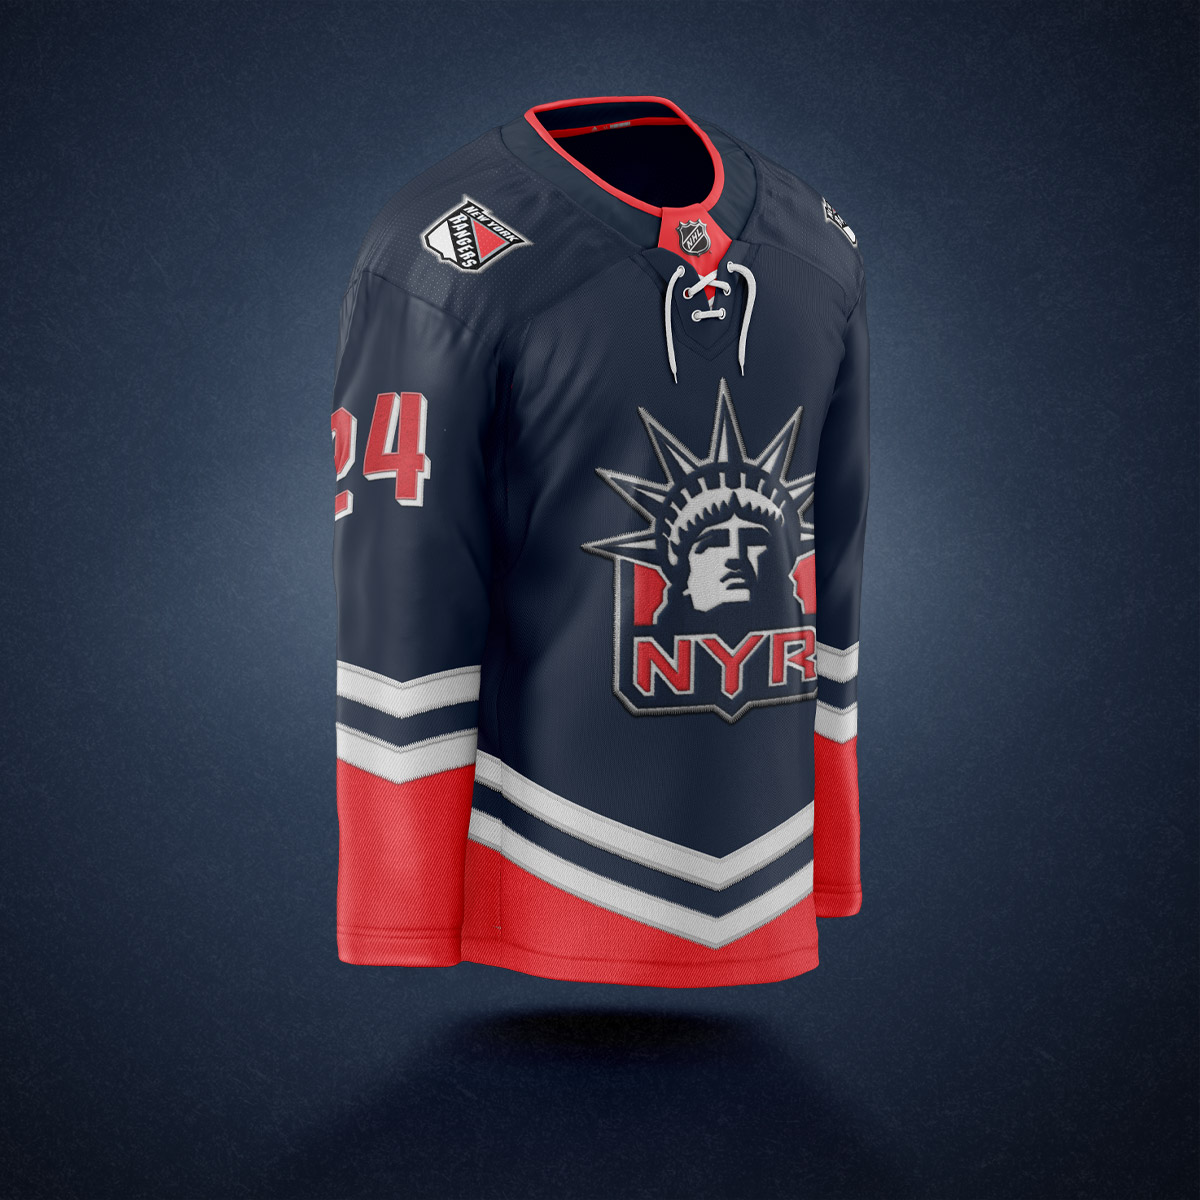 NYR jersey concept side view